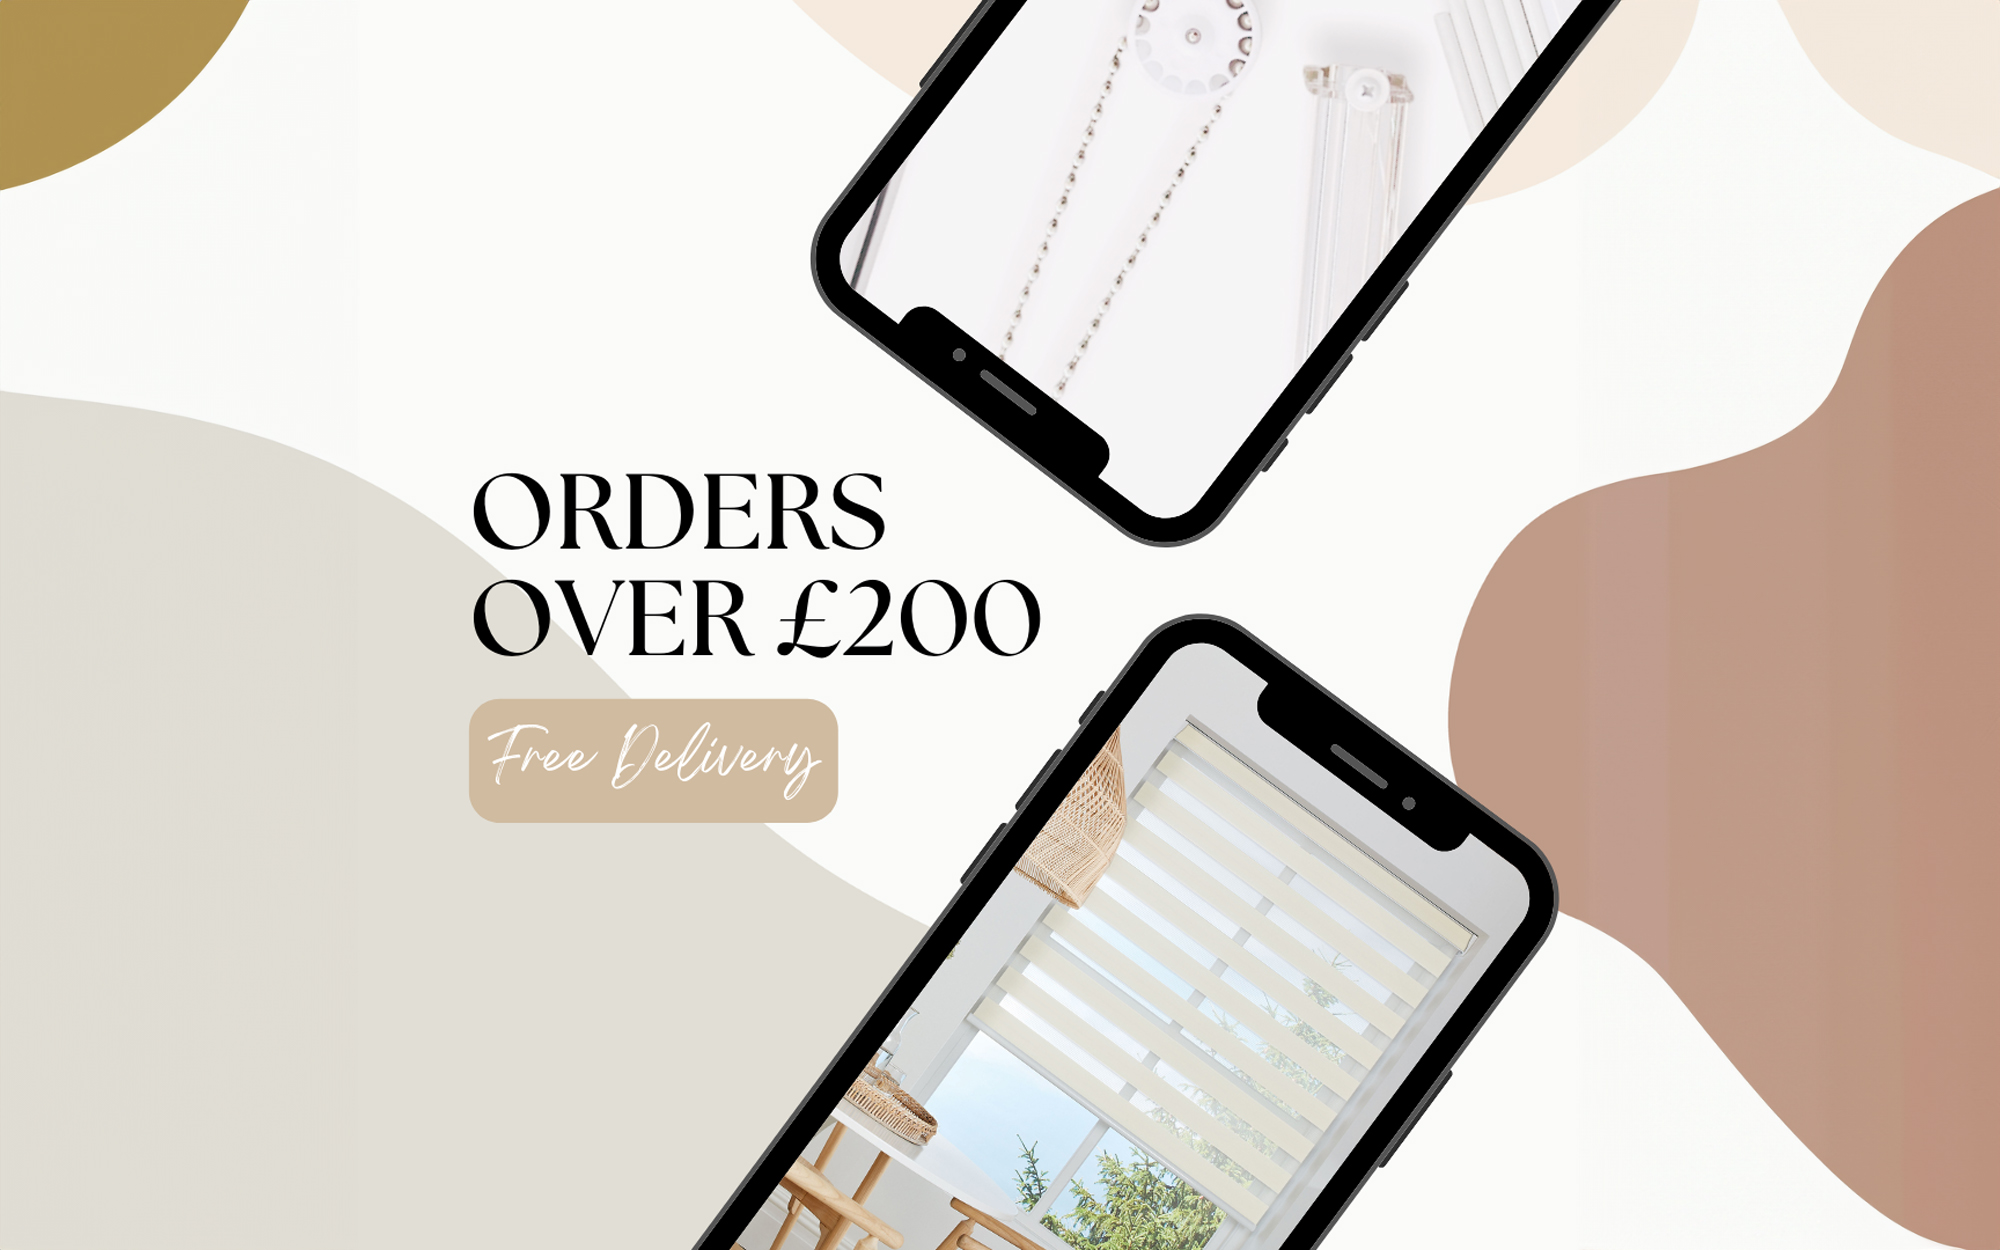 orders over two hundred pounds get free delivery